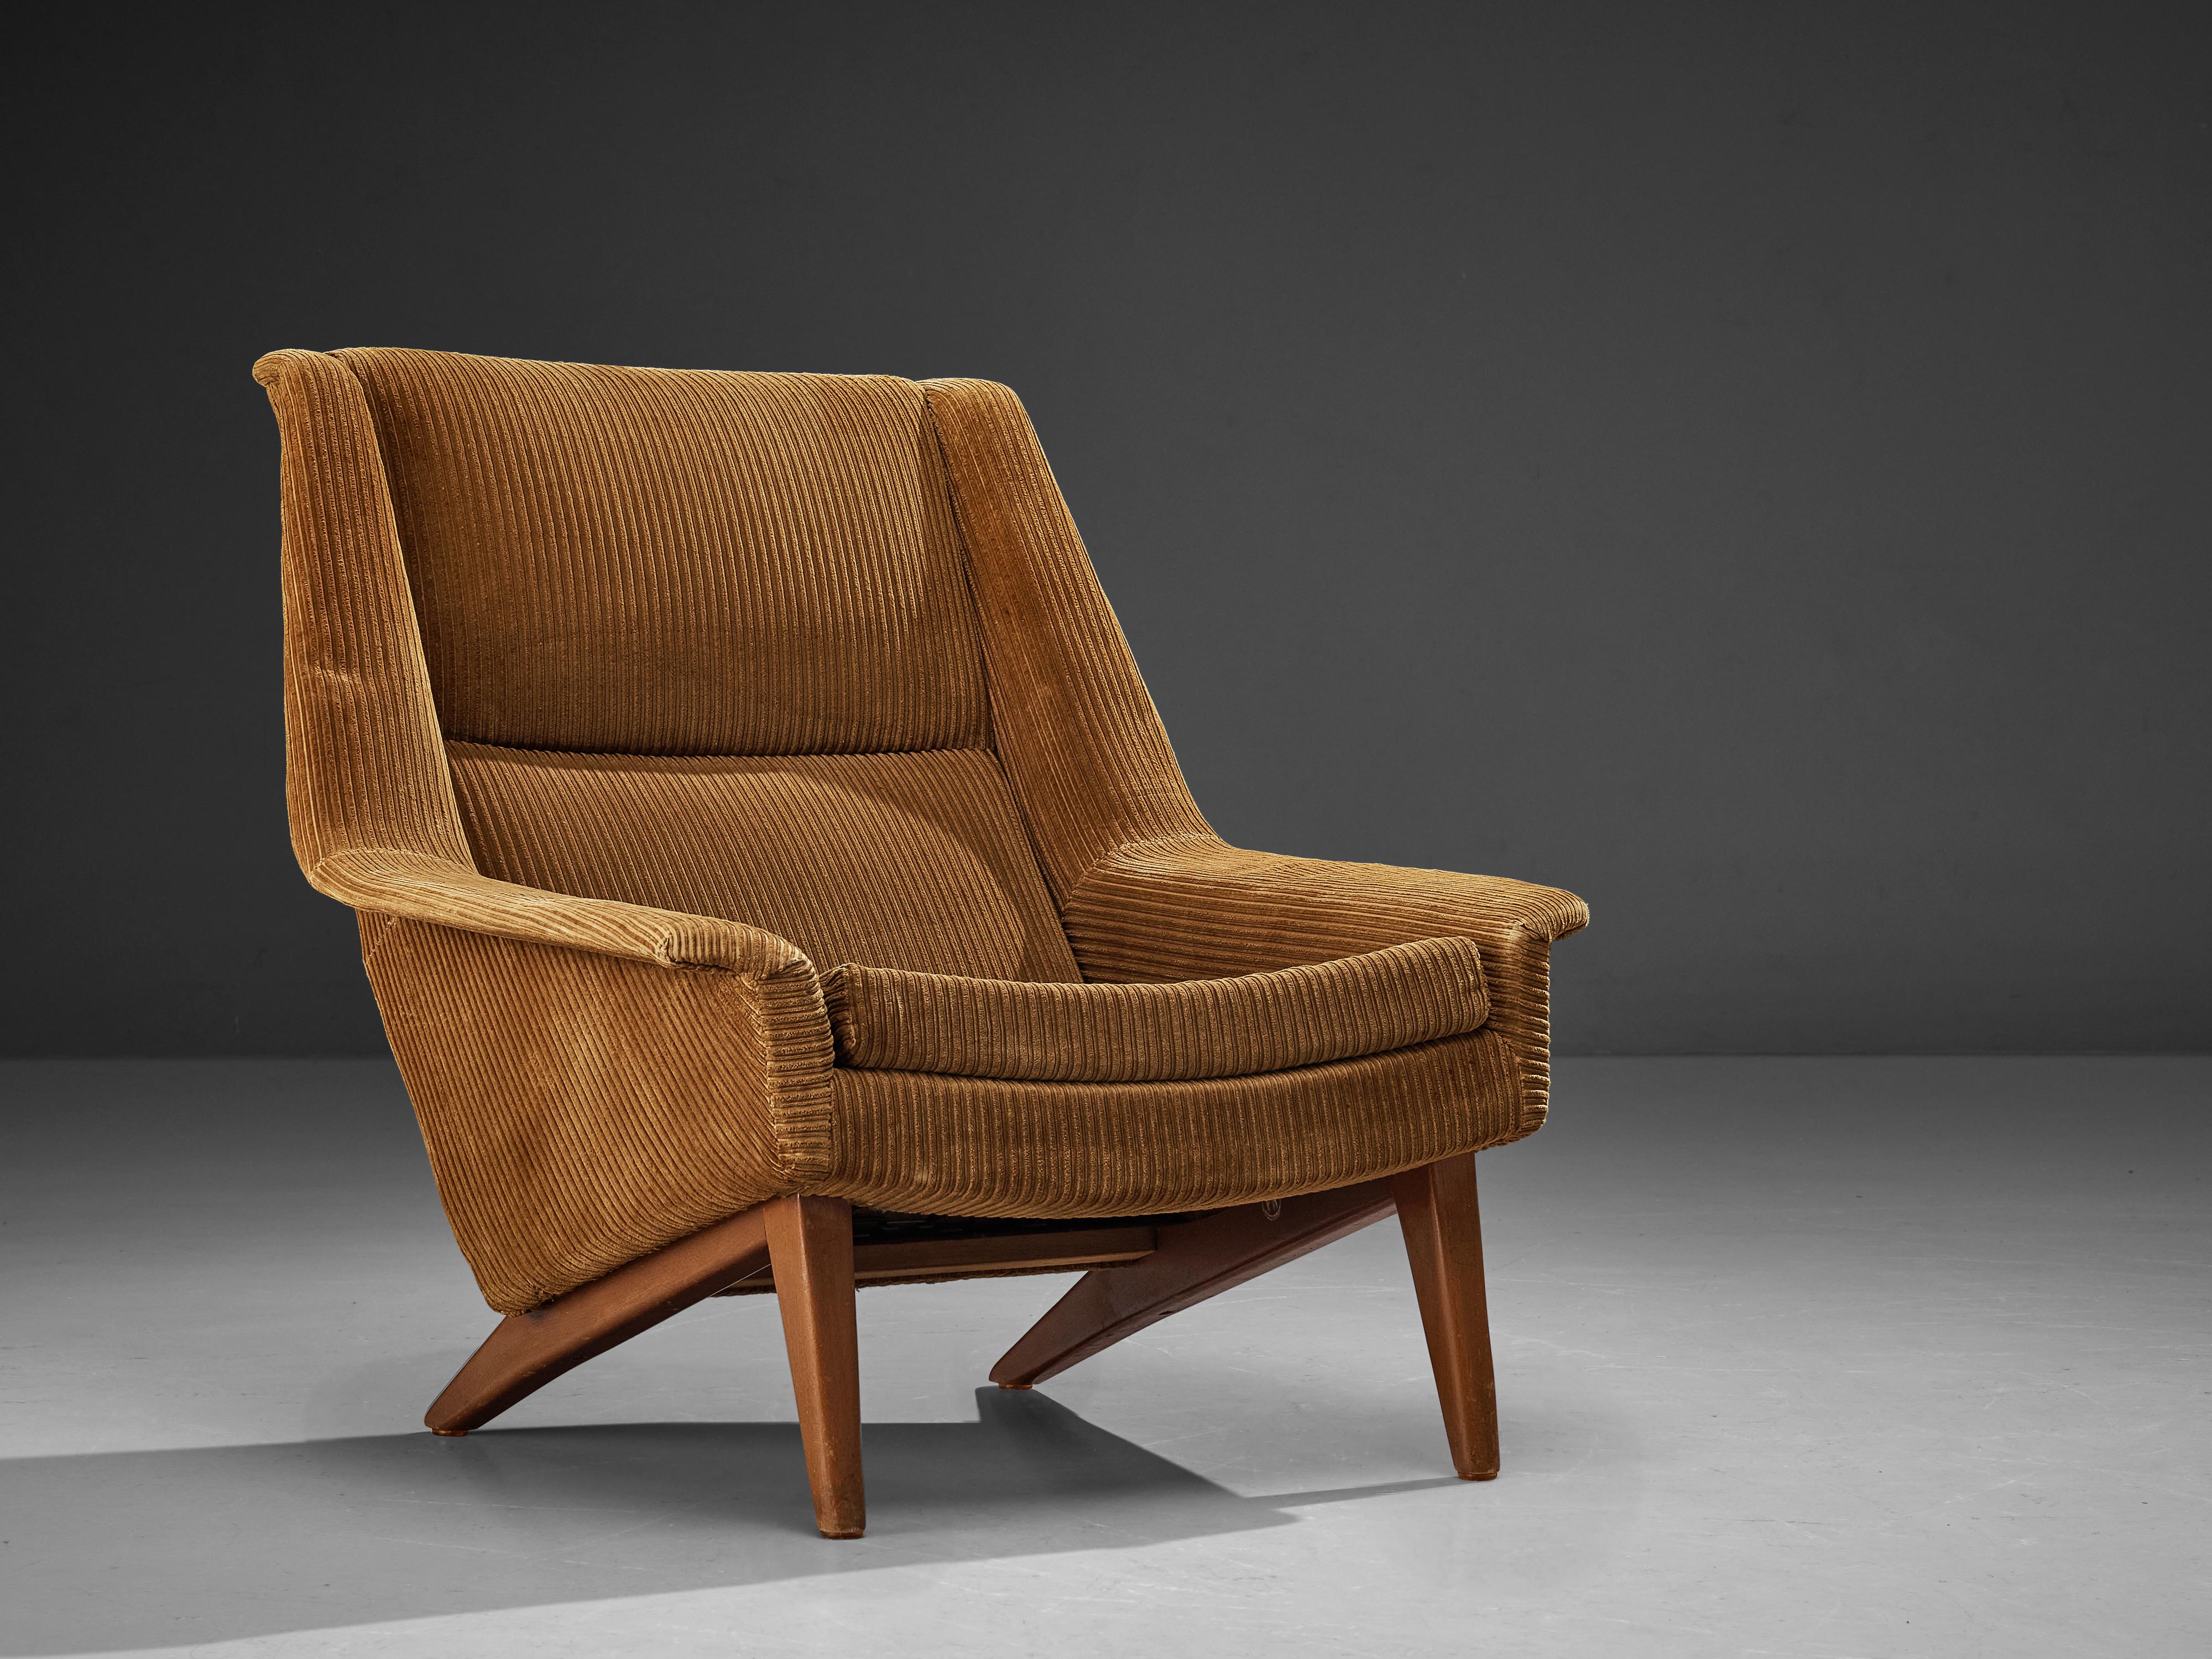 Folke Ohlsson for Fritz Hansen, lounge chair model ‘4410’, corduroy upholstery, wood, Denmark, circa 1957.

This high quality lounge chair is characterized by a stylish timeless design based on elegant shapes and clean lines. Upholstered in warm